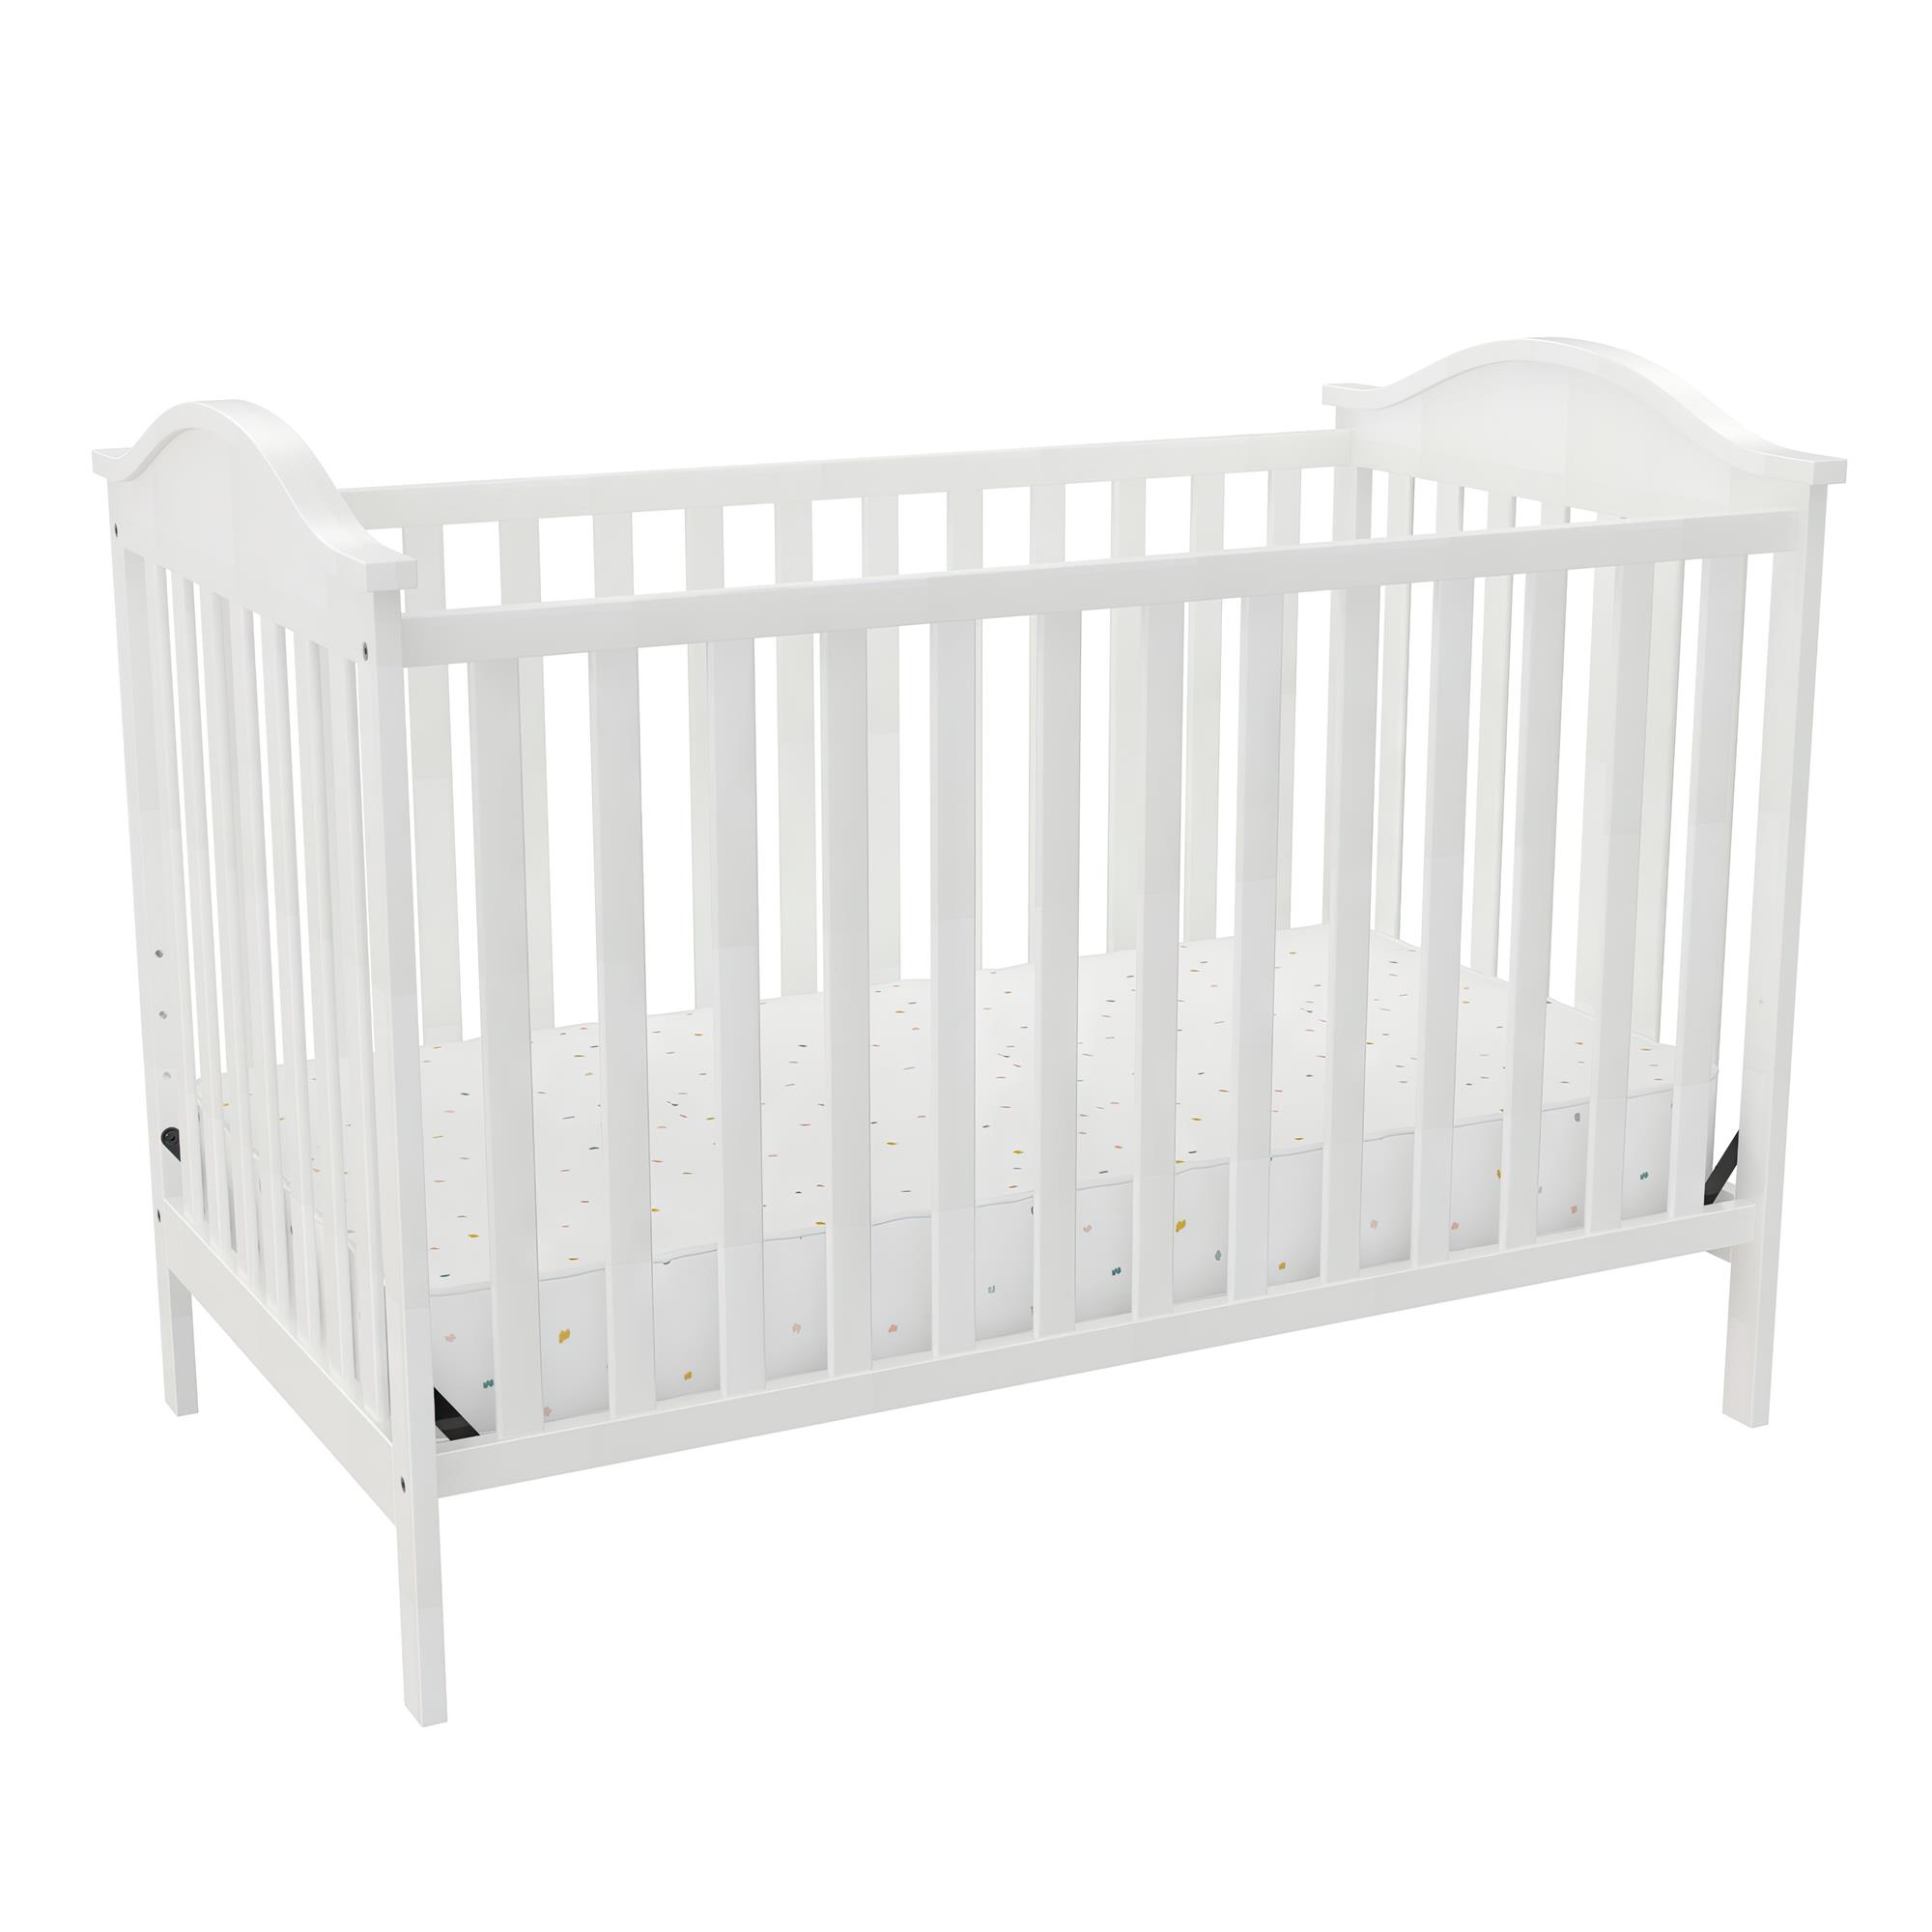 Baby Relax Adele 3-in-1 Convertible Crib, White - image 1 of 13